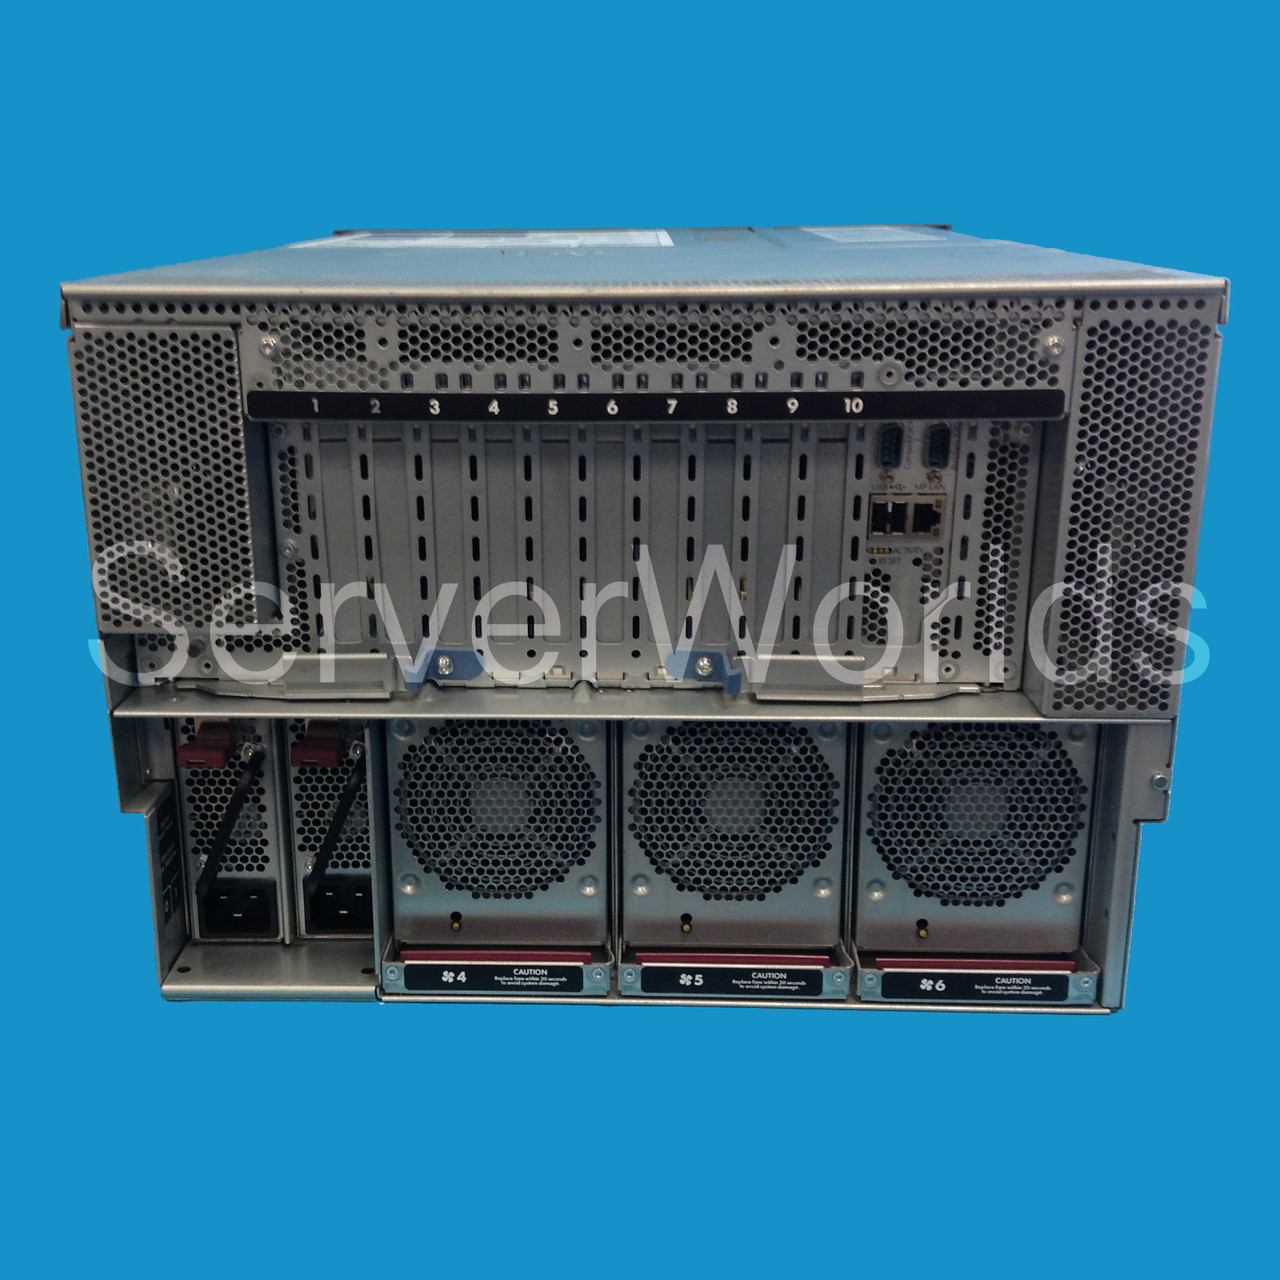 Refurbished HP RX6600 CTO Chassis AB464A Rear Panel